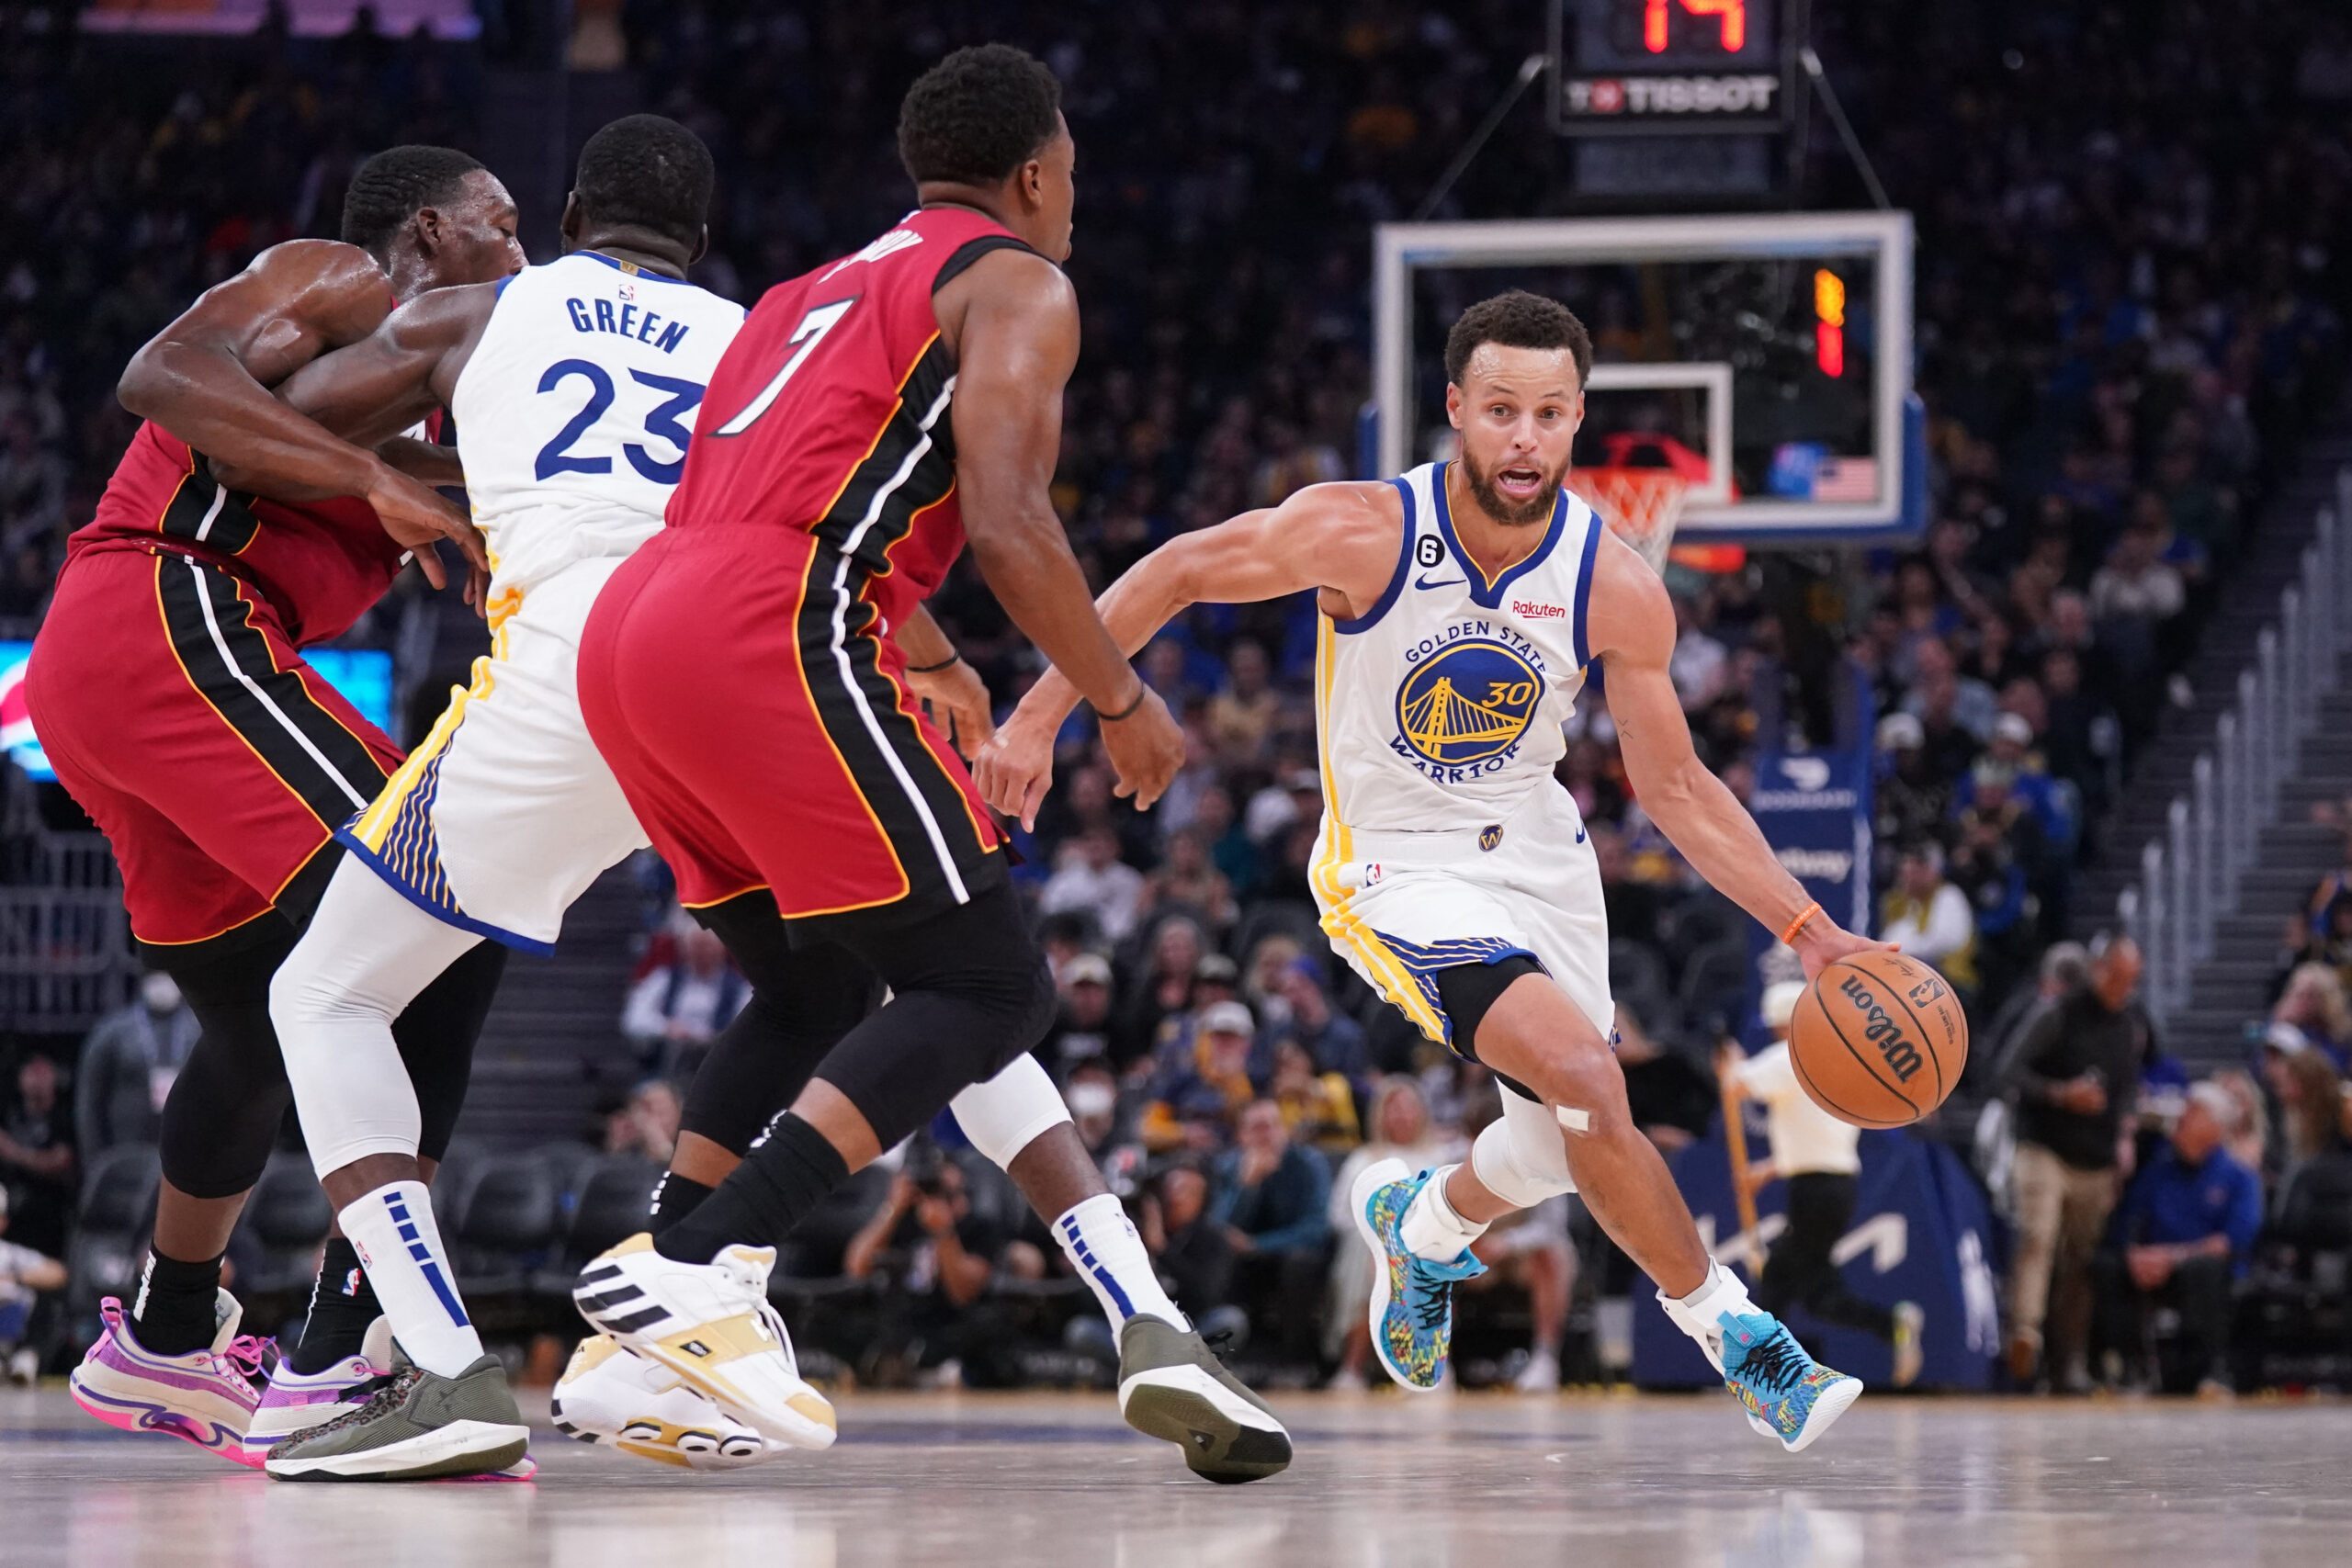 Steph Curry pumps in 33 as Warriors turn back Heat